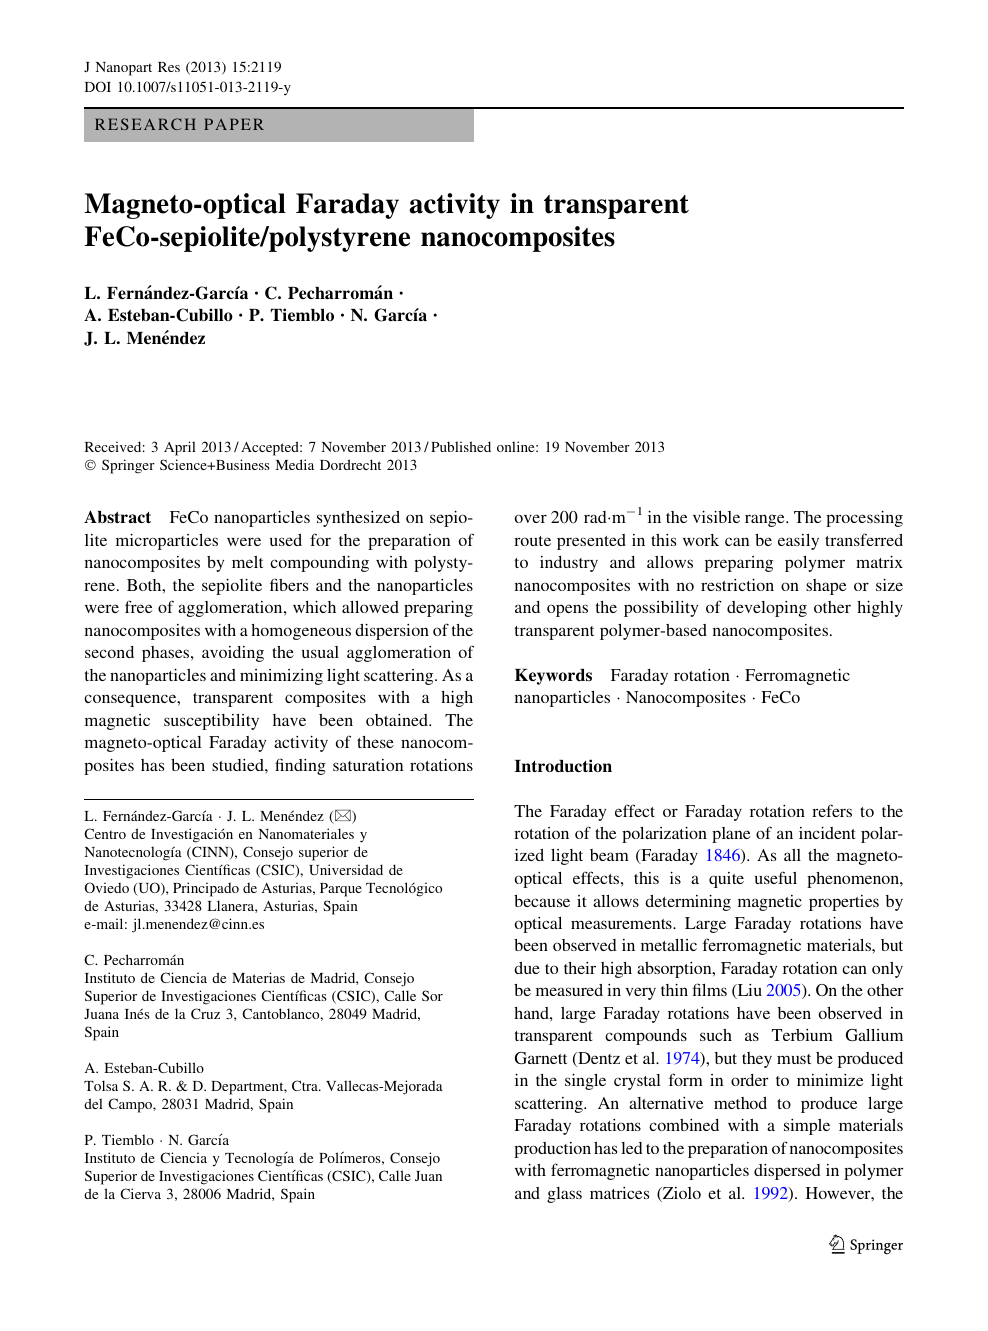 Magneto Optical Faraday Activity In Transparent Feco Sepiolite Polystyrene Nanocomposites Topic Of Research Paper In Nano Technology Download Scholarly Article Pdf And Read For Free On Cyberleninka Open Science Hub